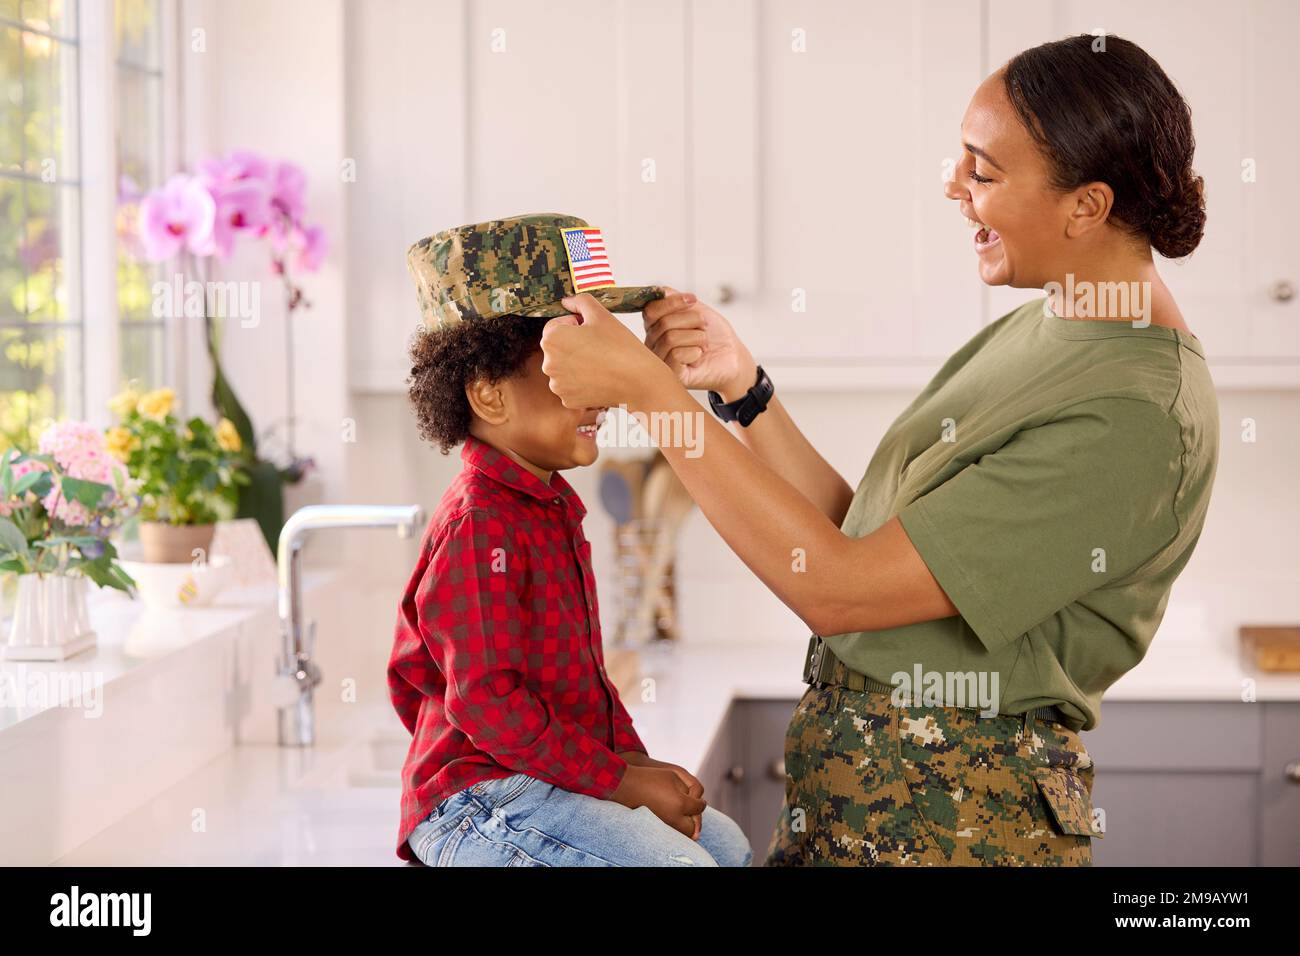 American Army Mother In Uniform Home On Leave Putting Cap On Son Sitting In Family Kitchen Stock Photo